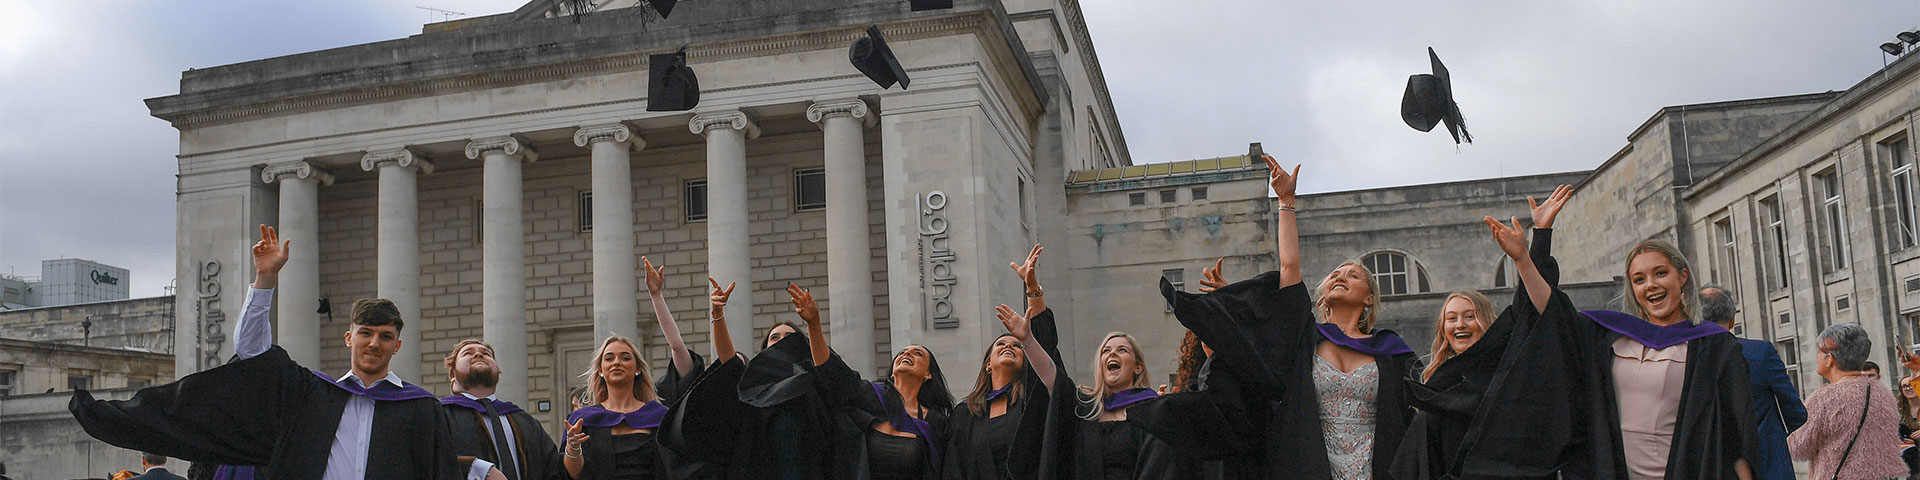 A group of graduating students outside of Southampton Guildhall.